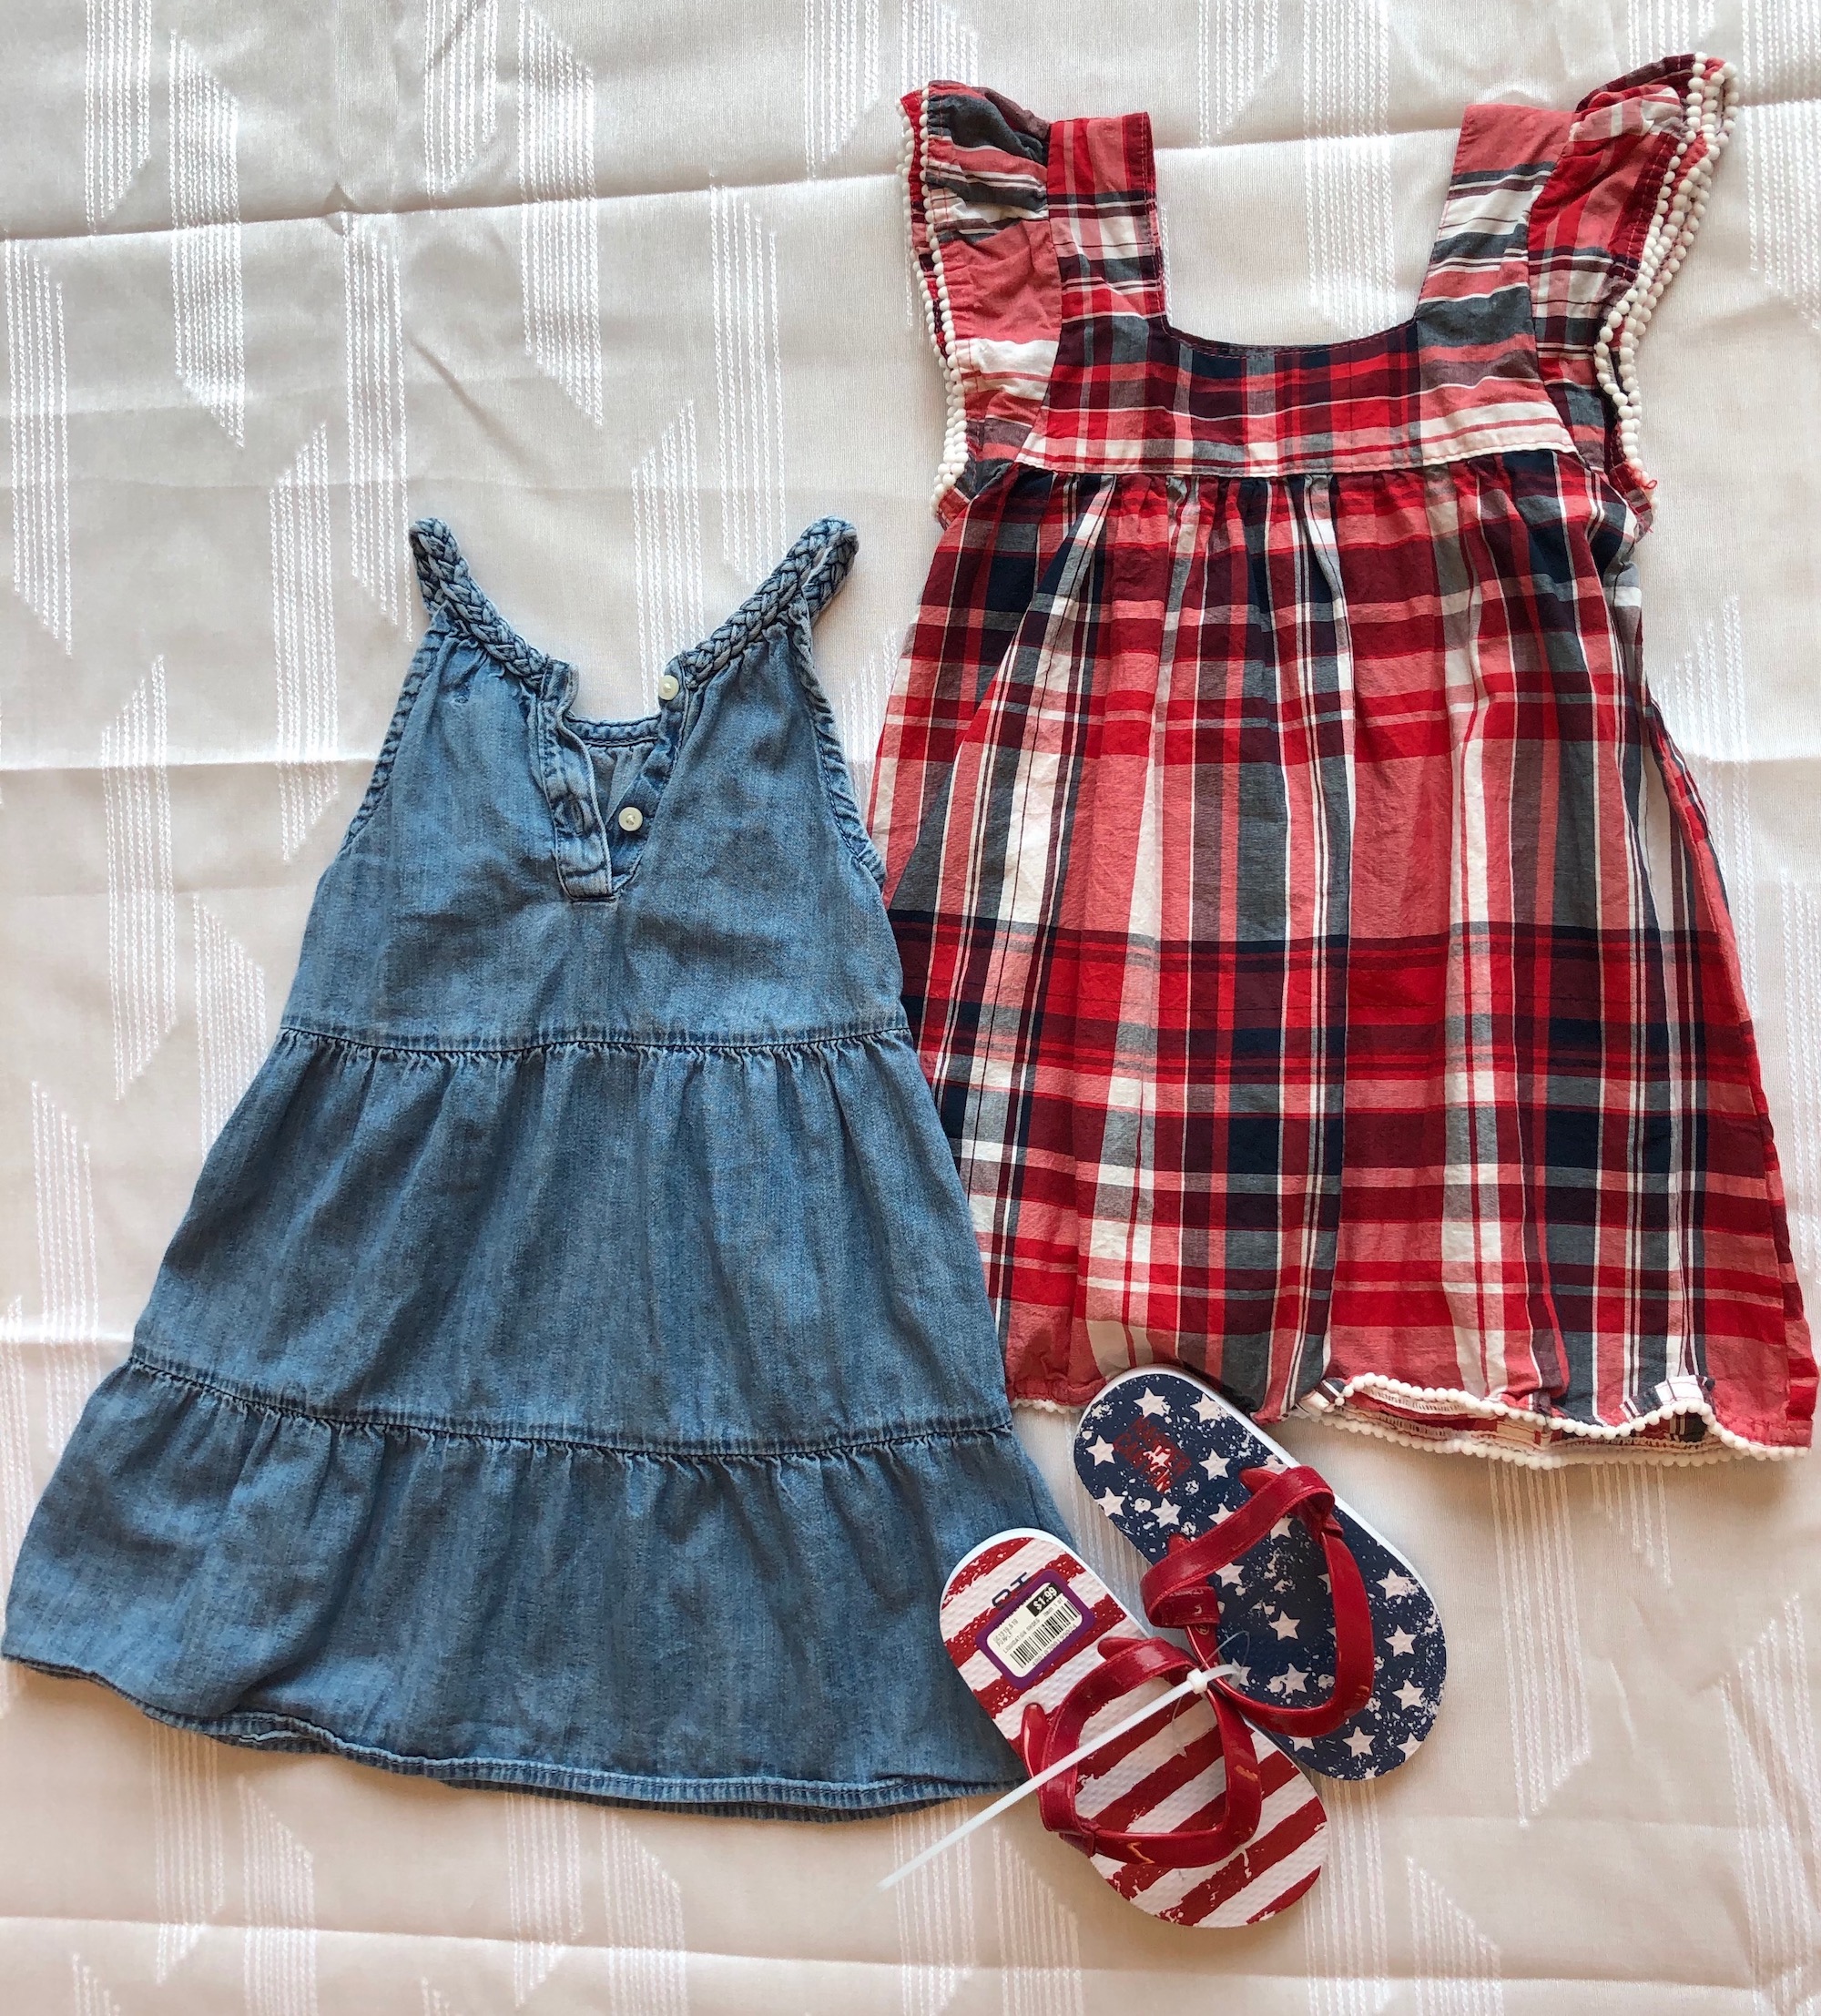 Girls' sleeveless dress and shoes with stripes and stars